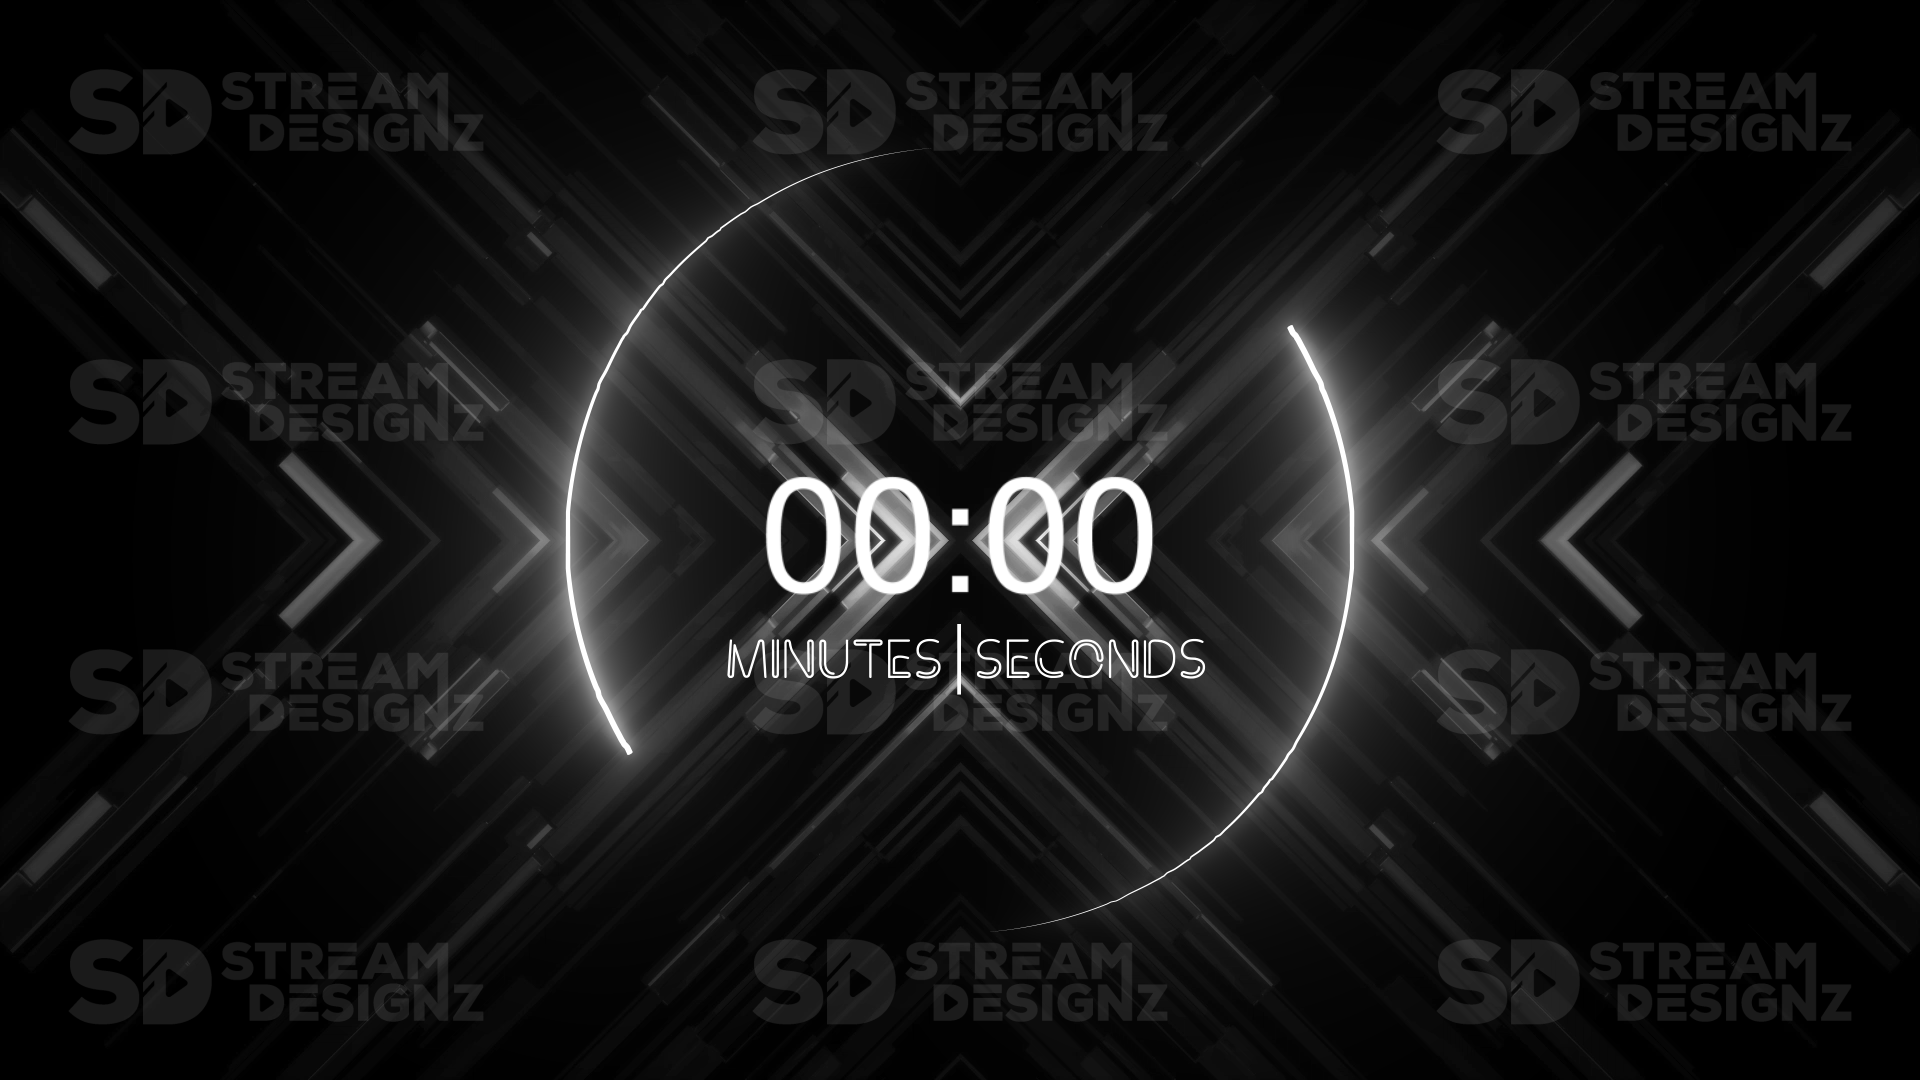 5 minute count up timer Shadow preview video stream designz